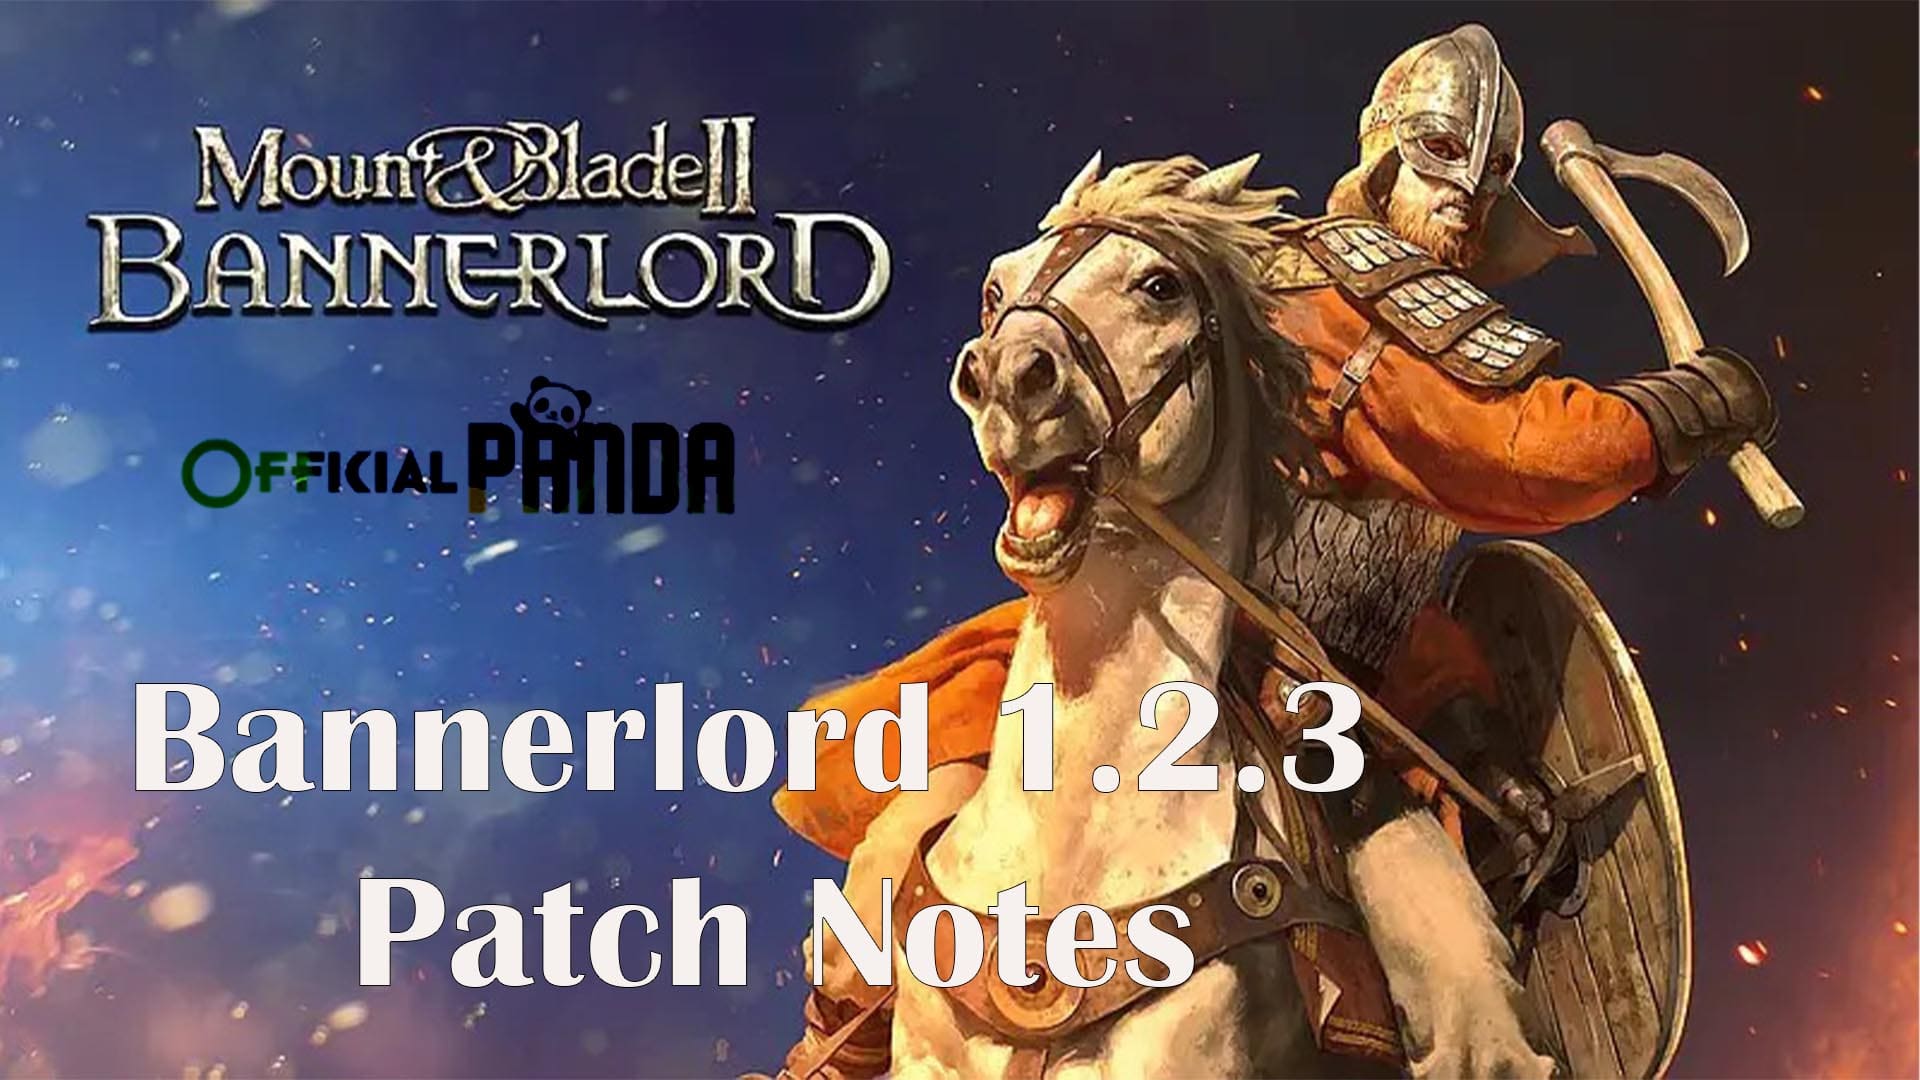 Bannerlord 1.2.3 Patch Notes